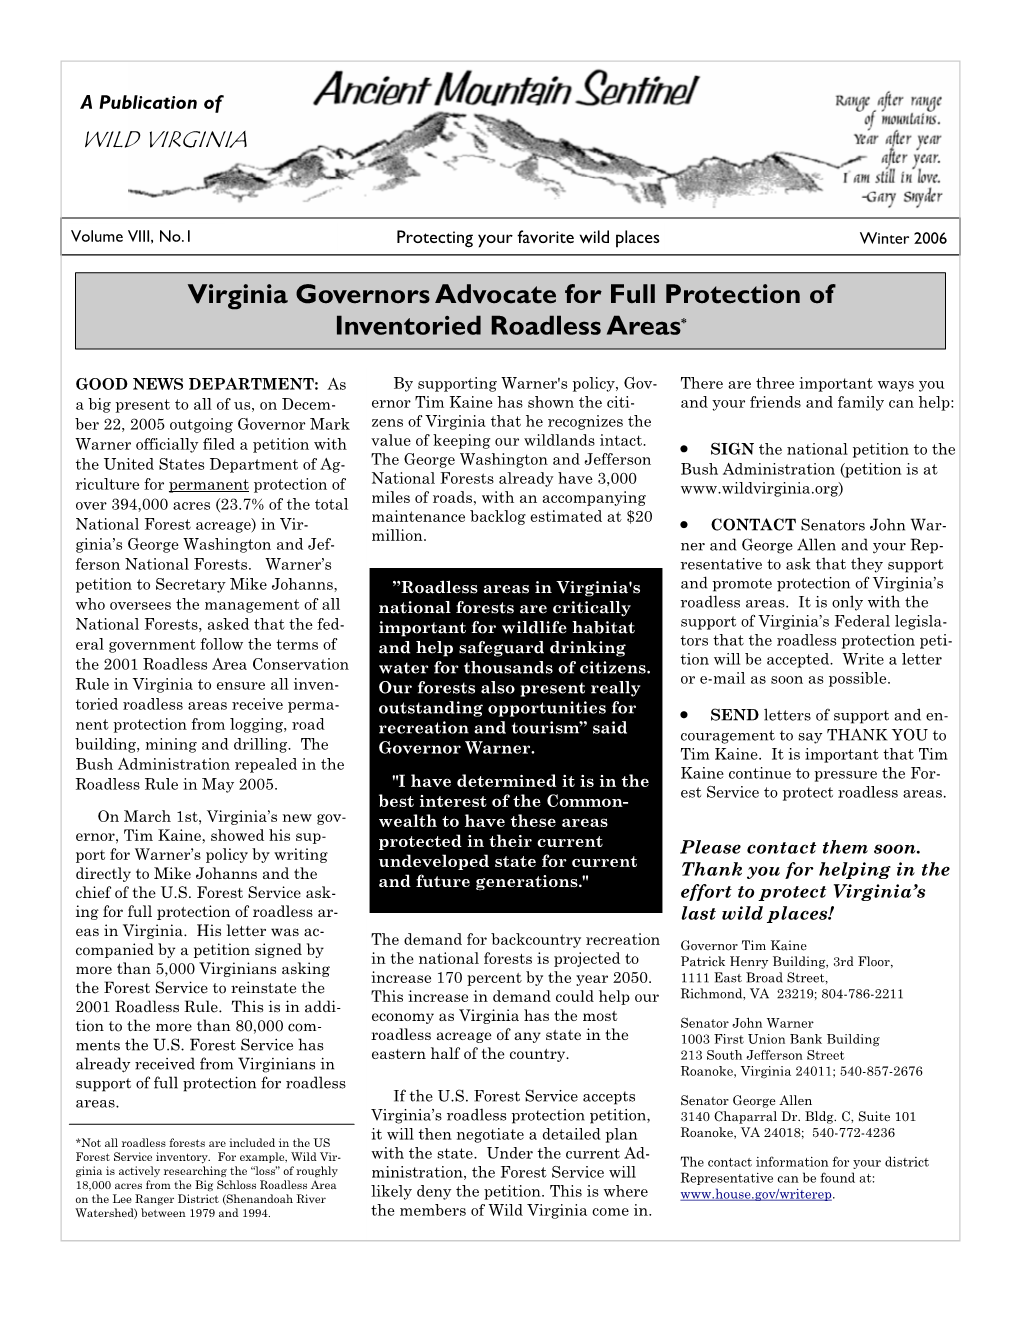 Virginia Governors Advocate for Full Protection of Inventoried Roadless Areas*